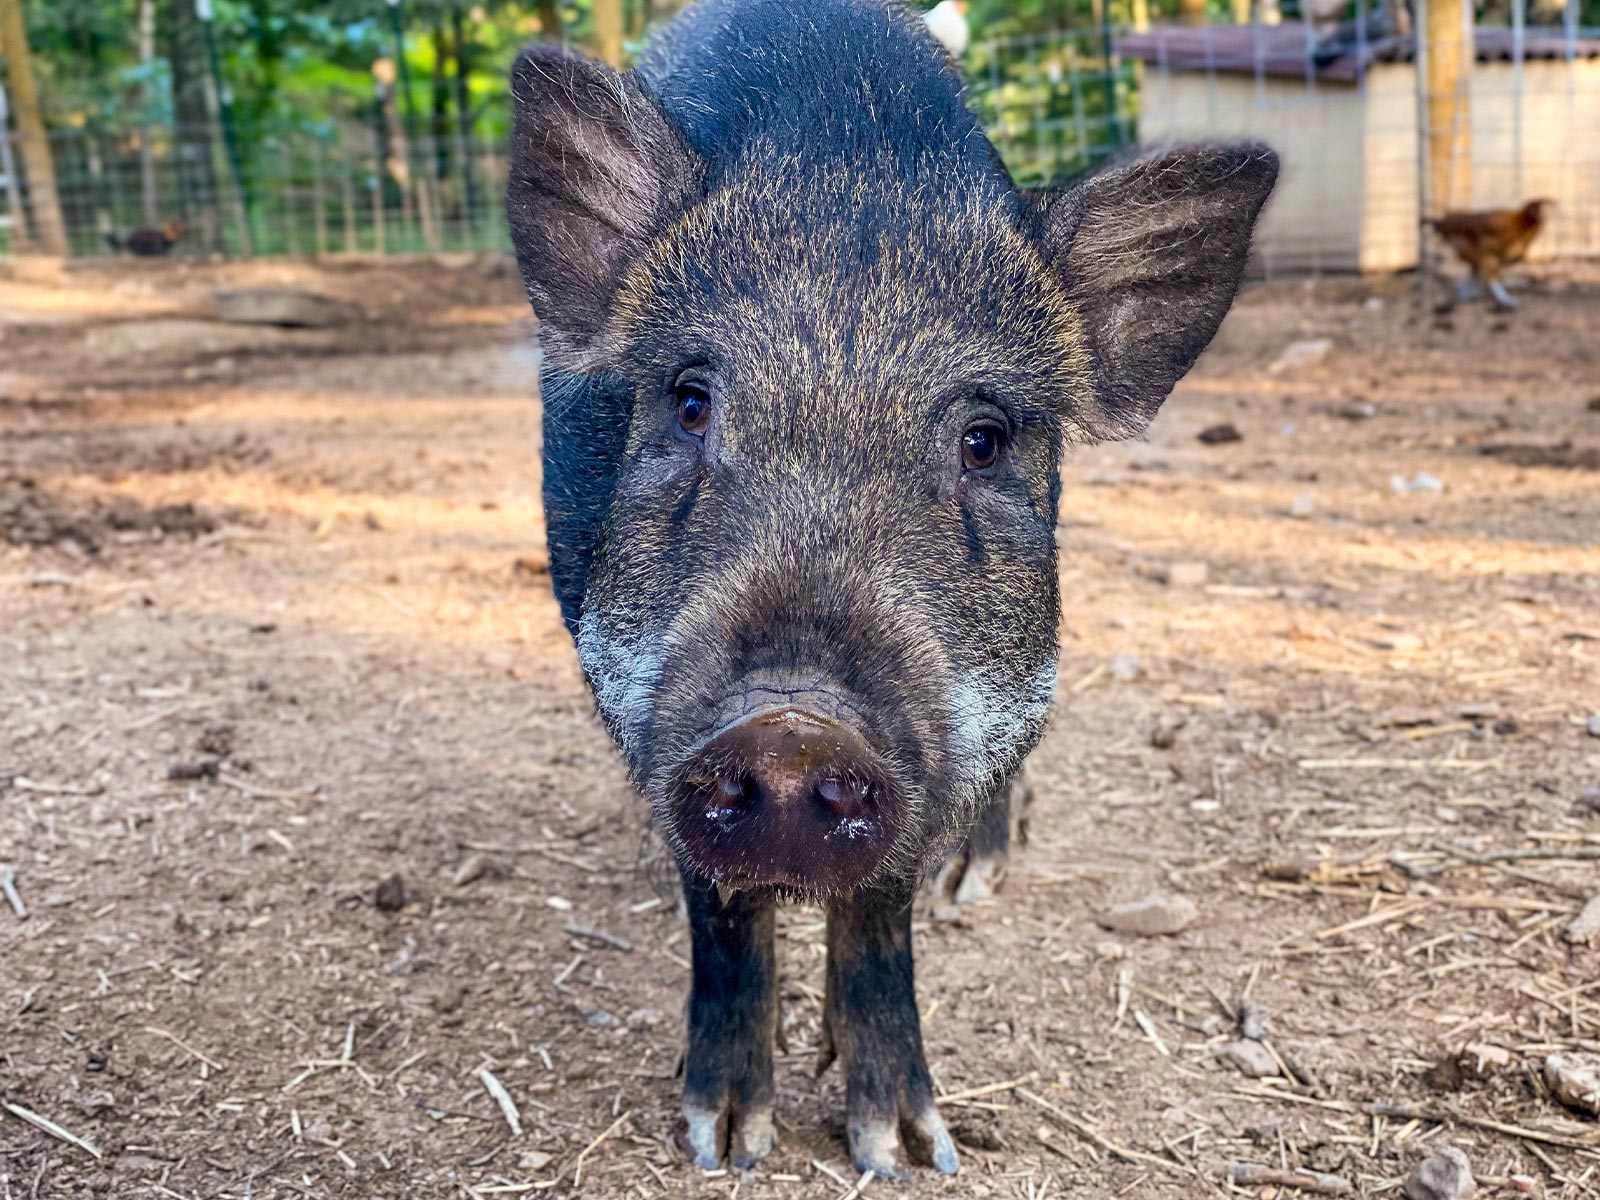 Pigs as Pets: The Good, The Bad, and The Piggy